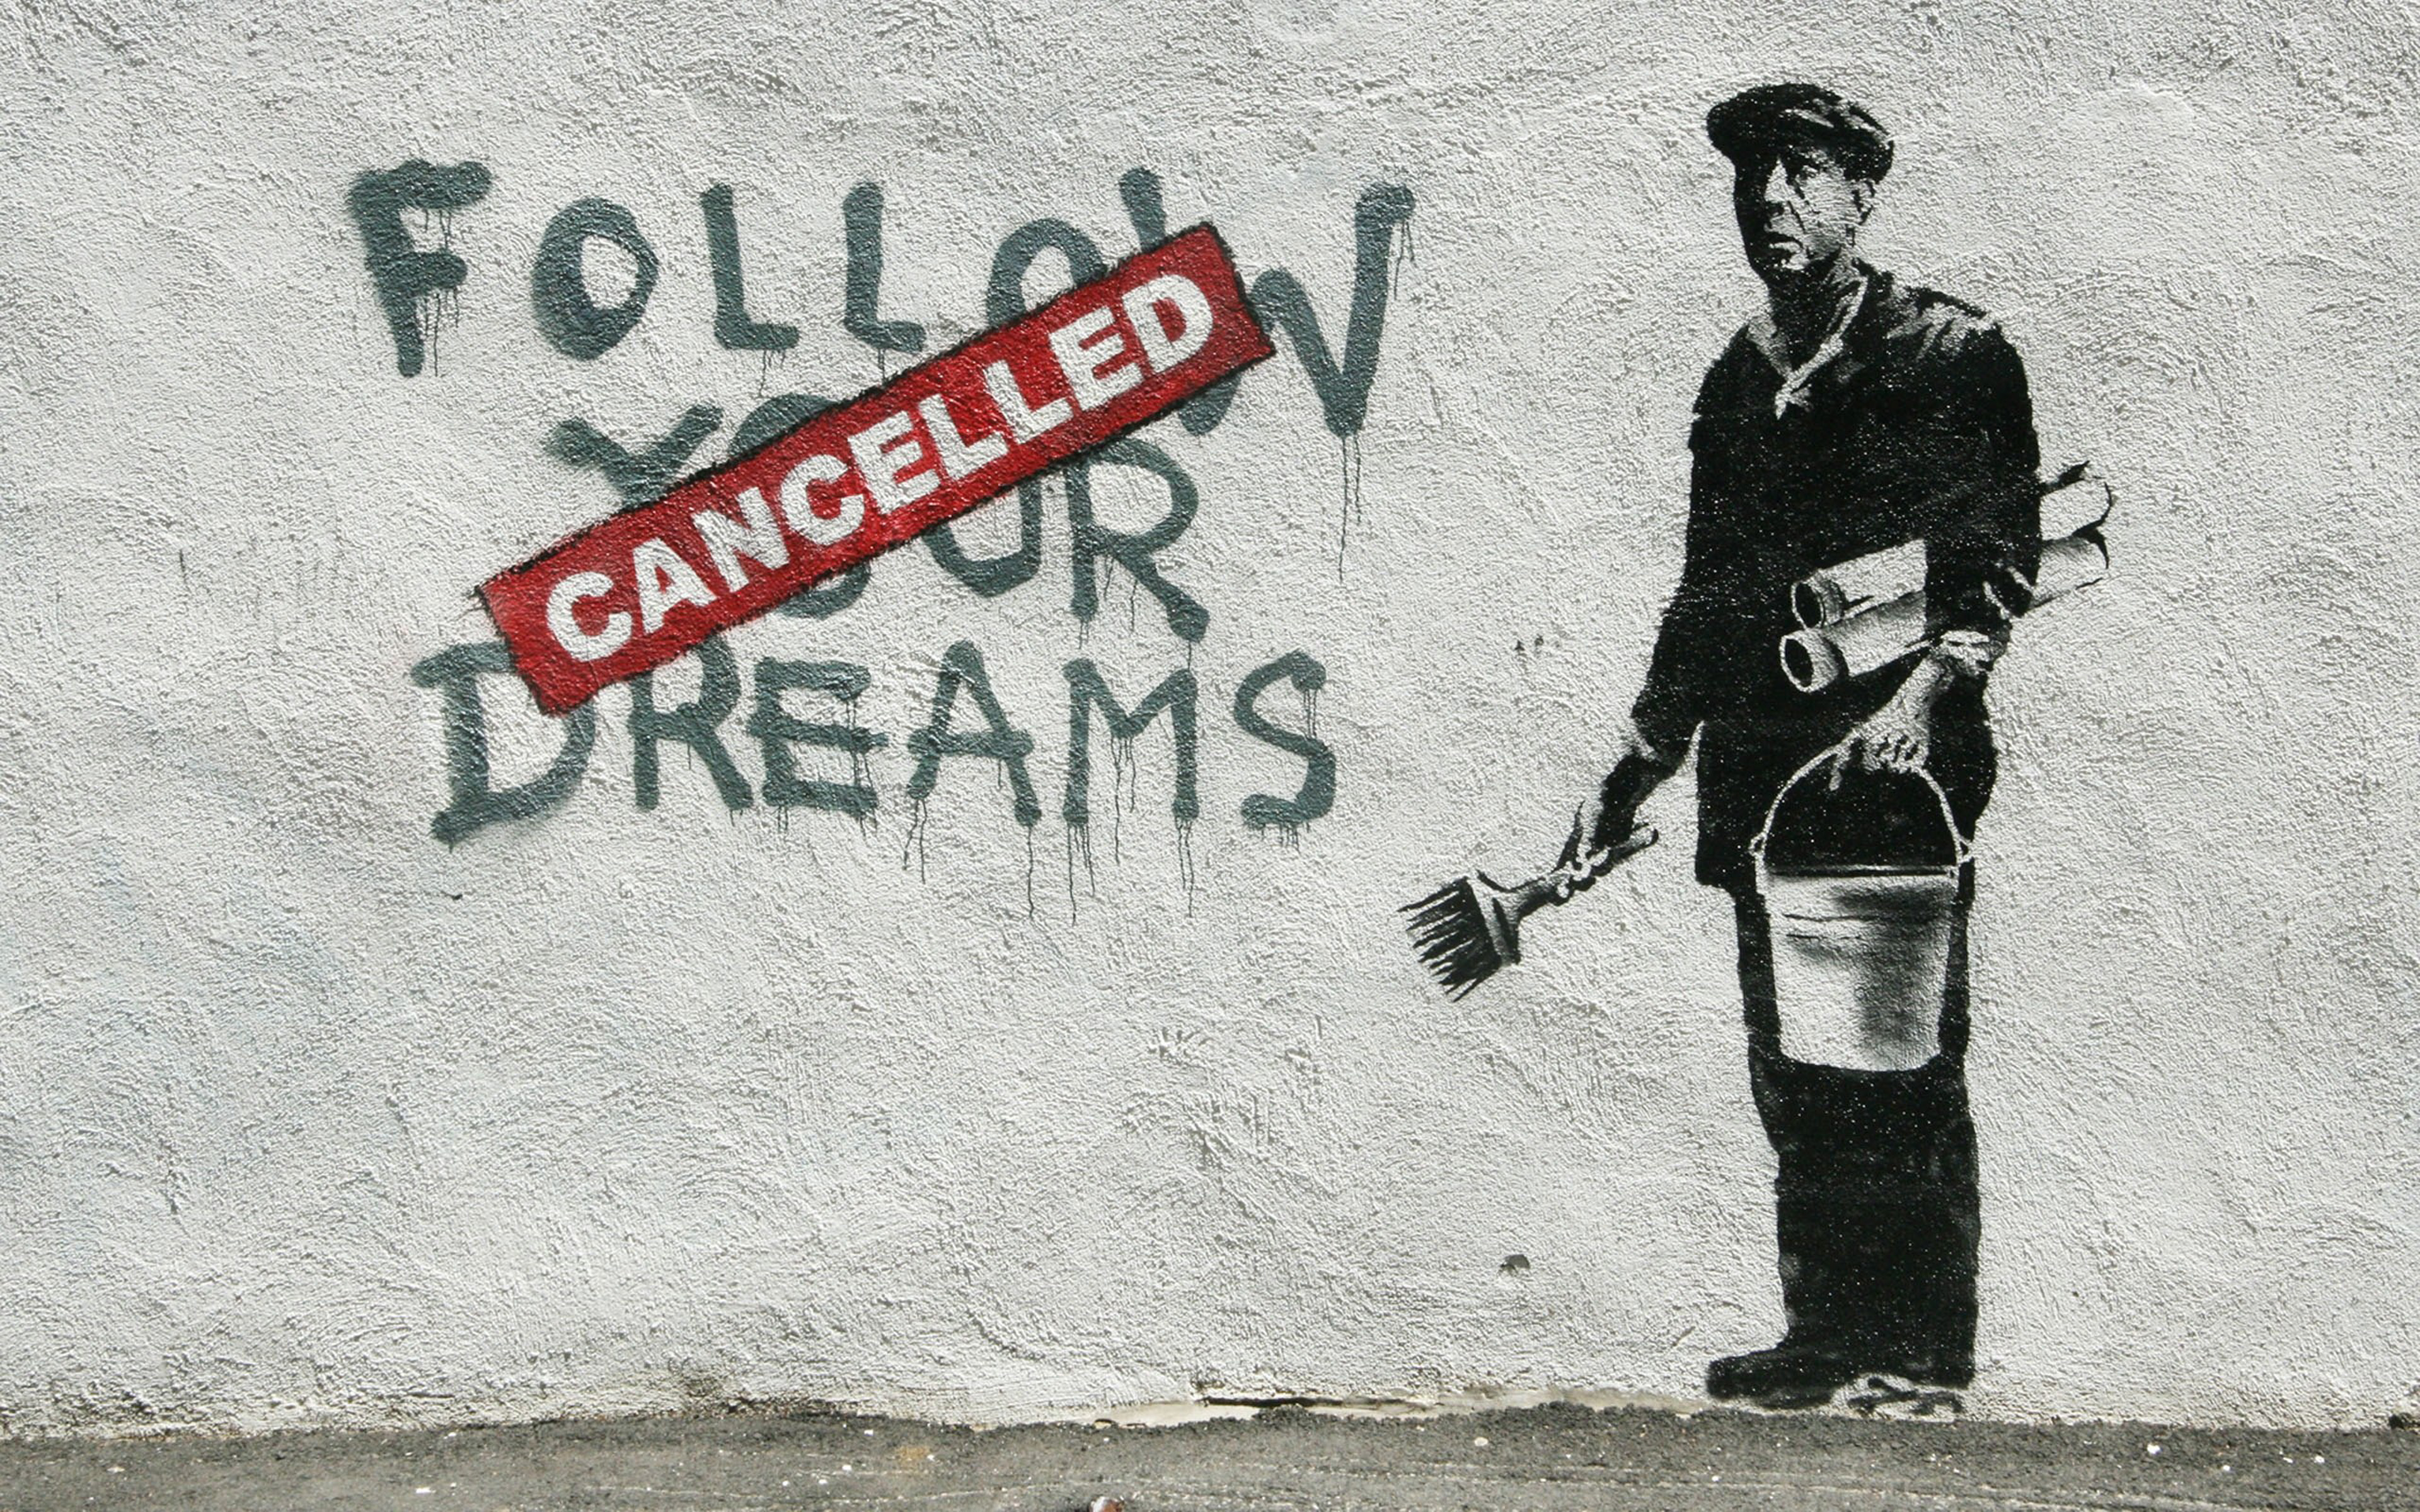 Banksy - follow your dreams (cancelled)